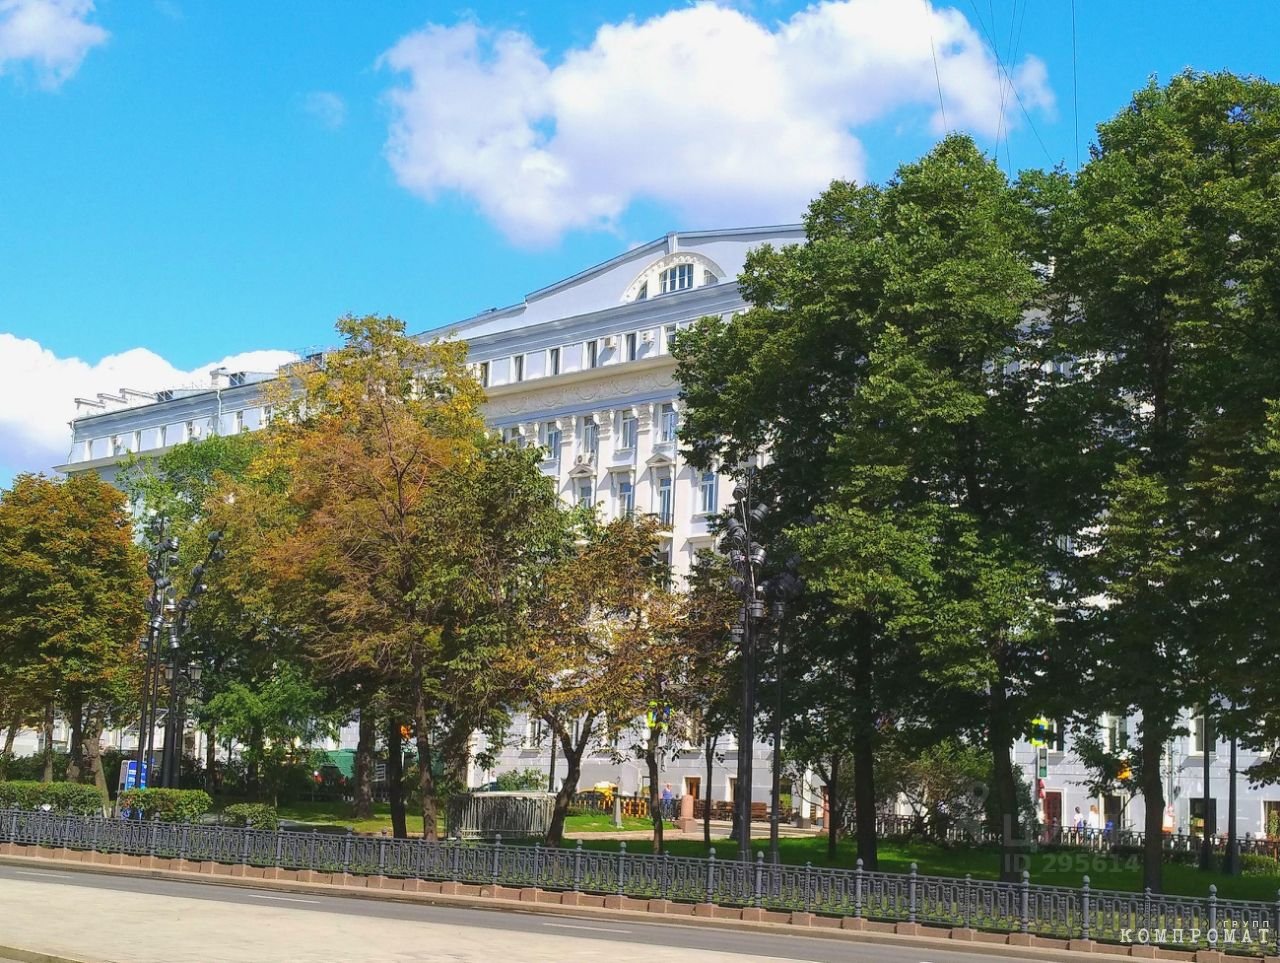 The historic house on Nikitsky Boulevard was restored and turned into an elite club property